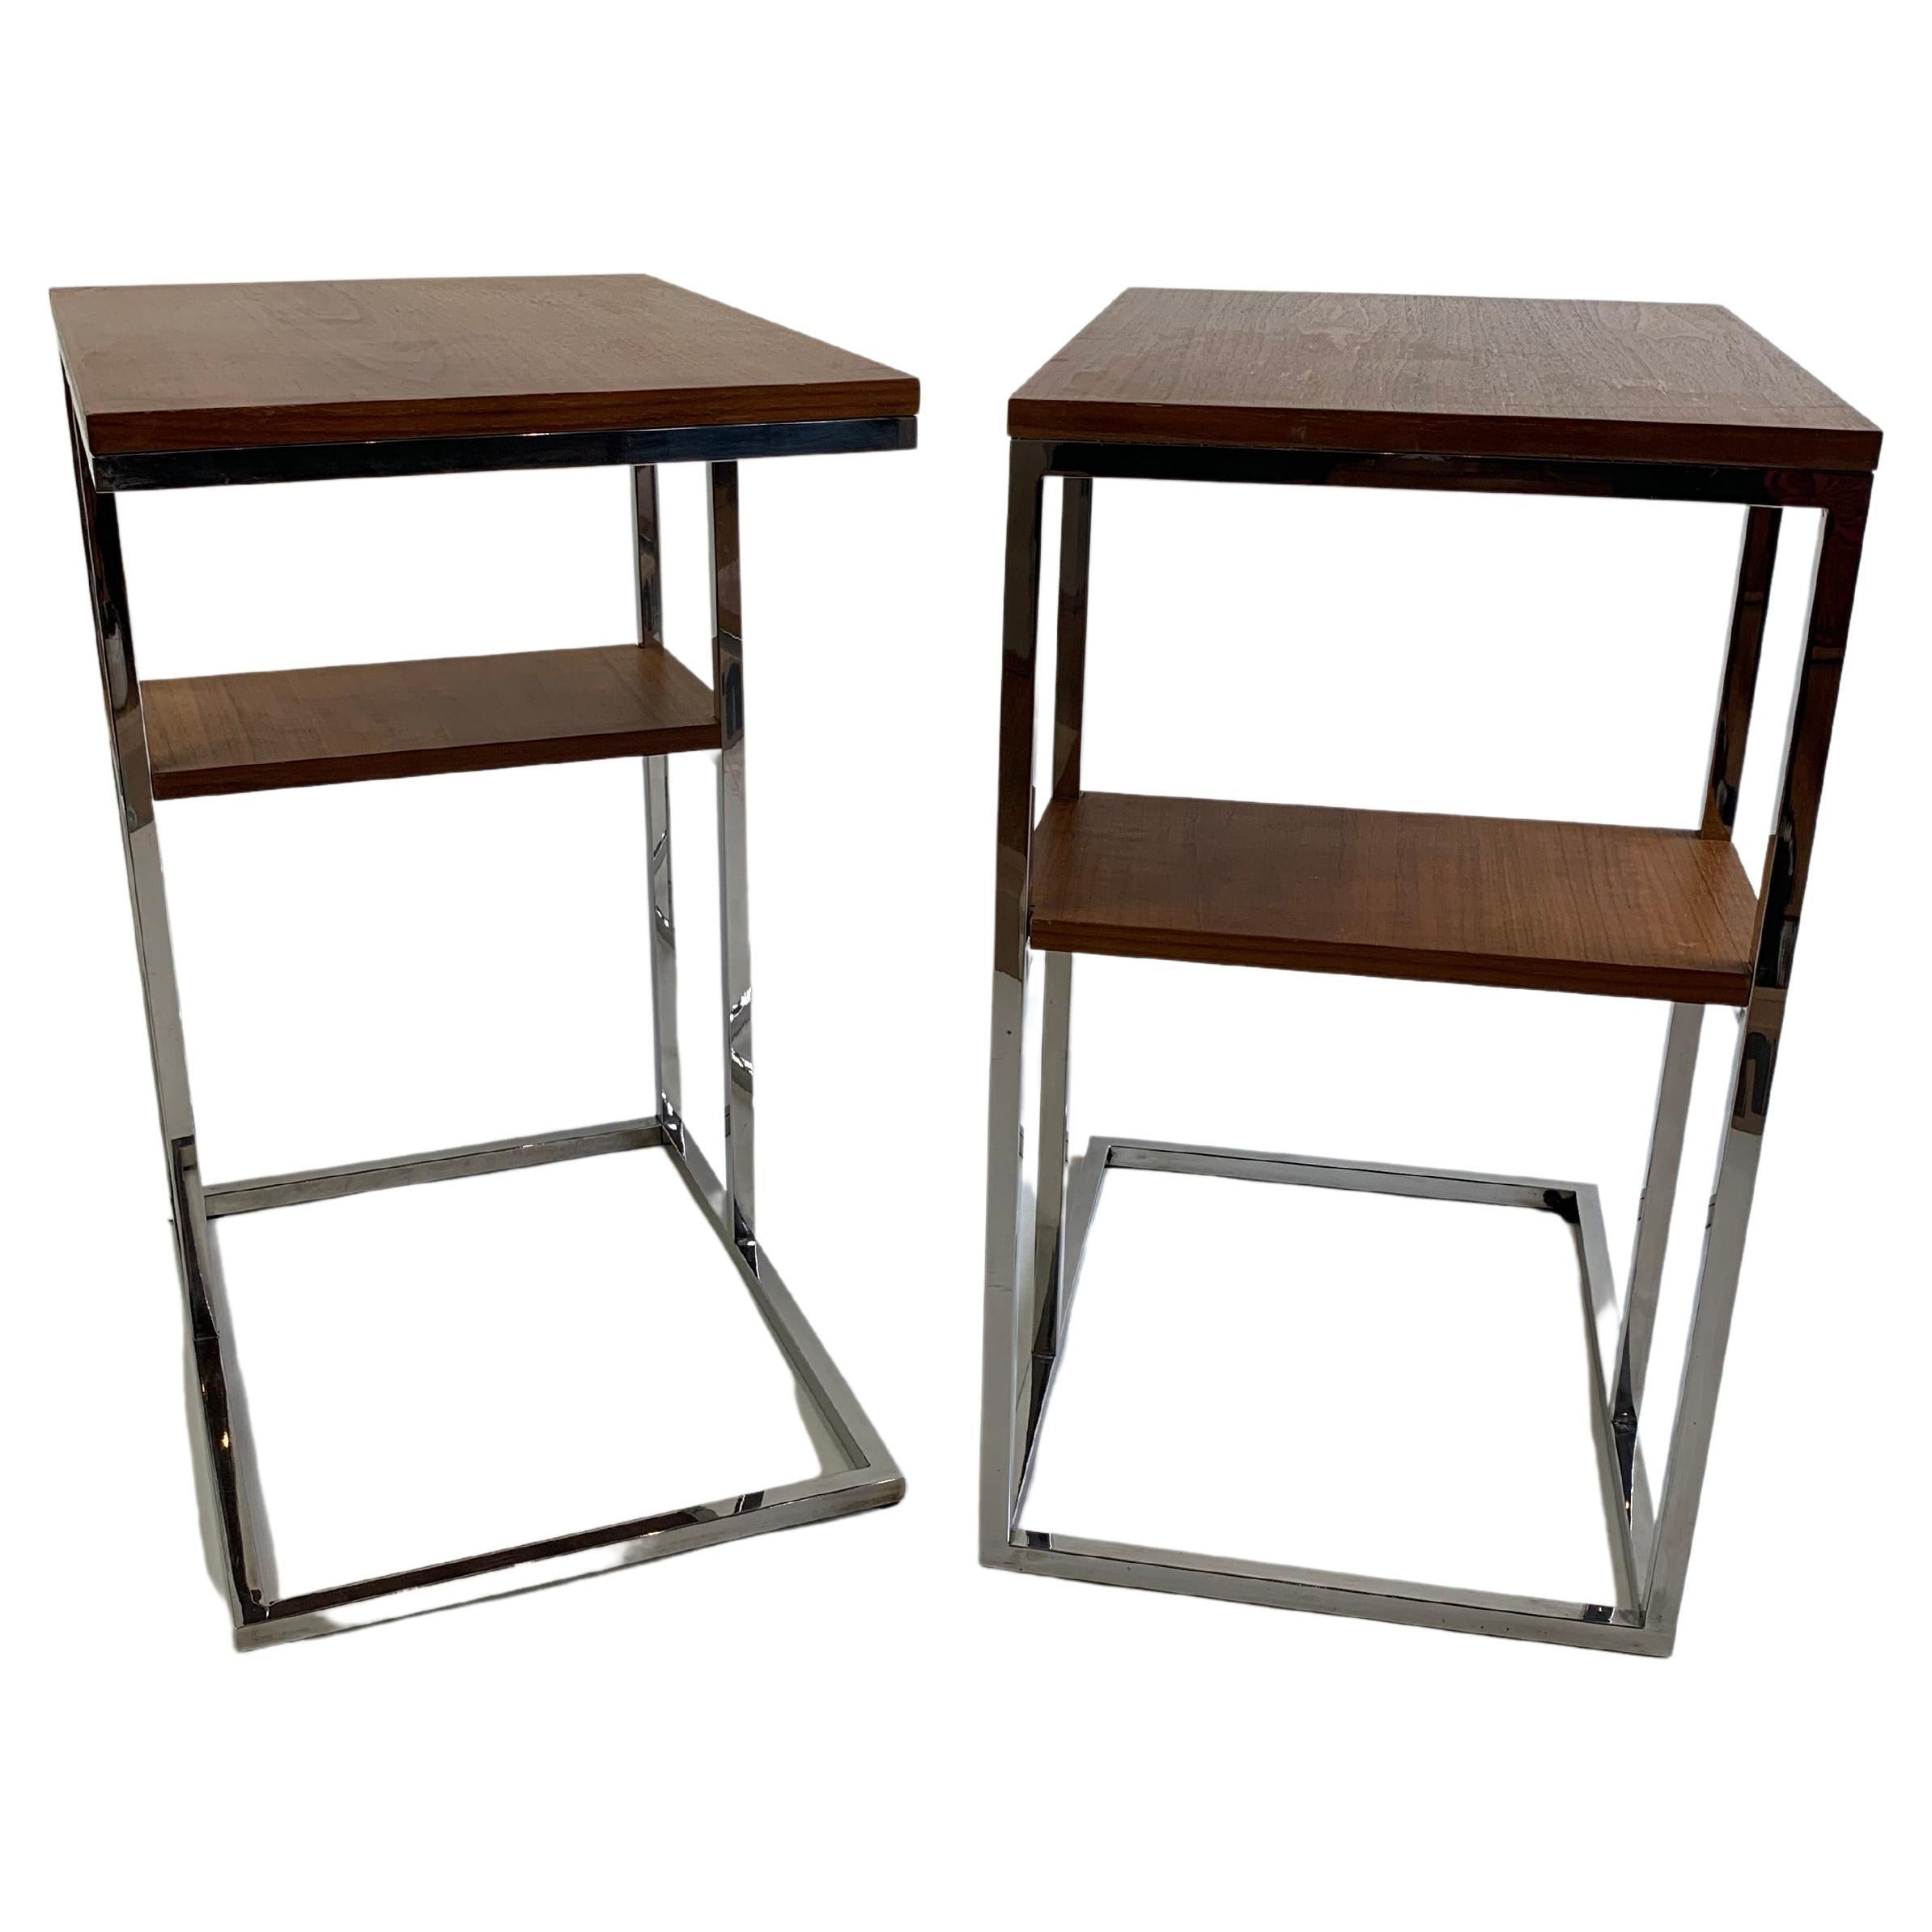 Pair of Midcentury Chrome and Teak Side Tables For Sale